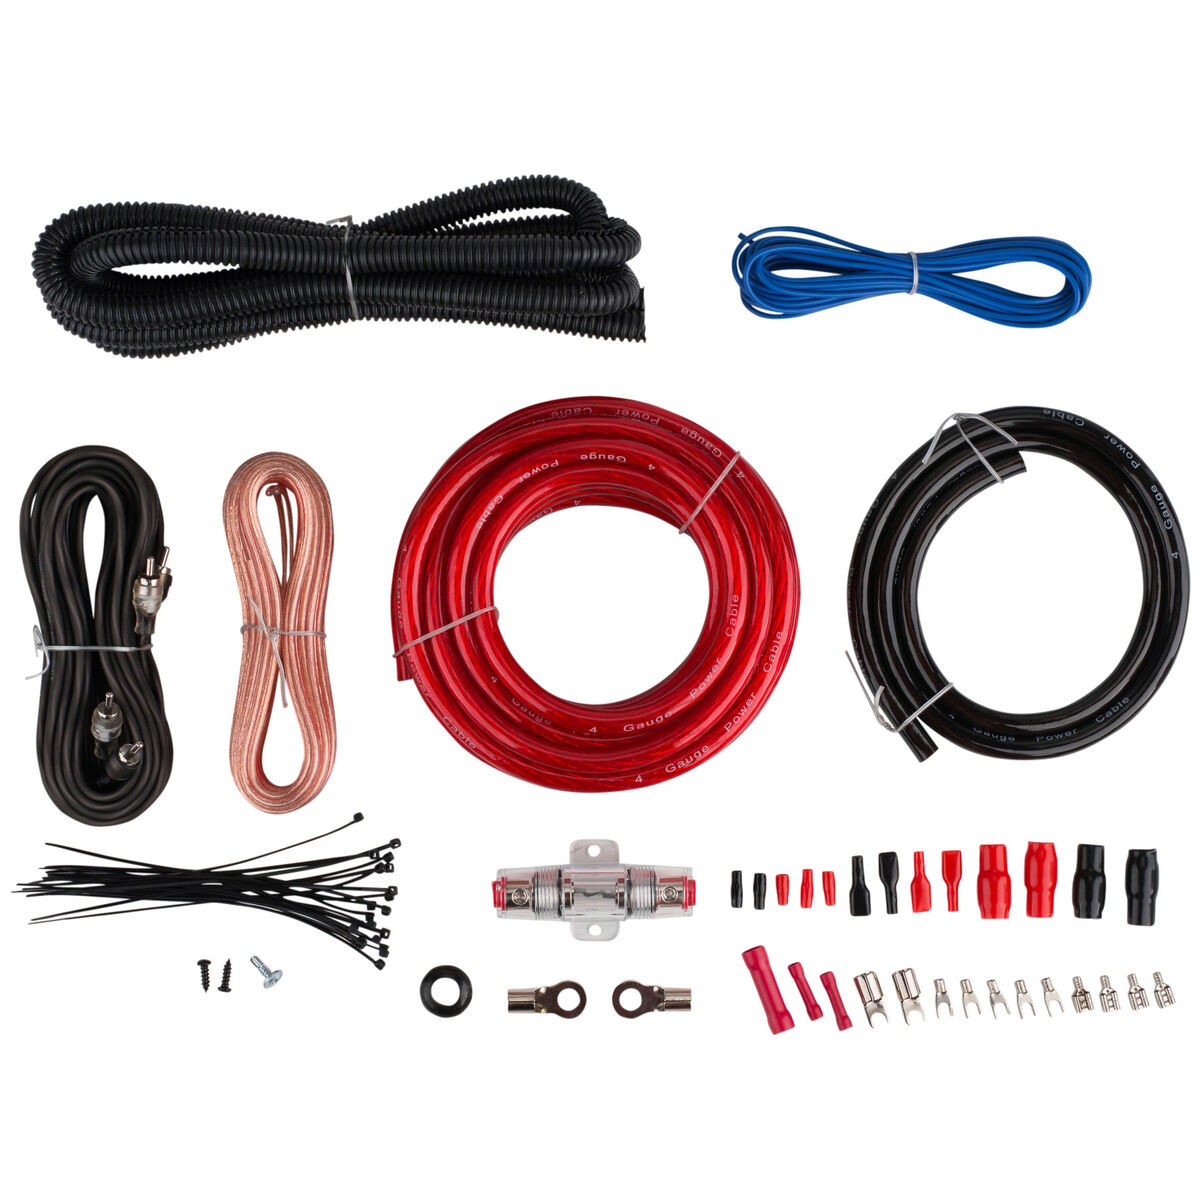 4 AWG Amplifier Install Wiring Kit with Interconnects 2400W